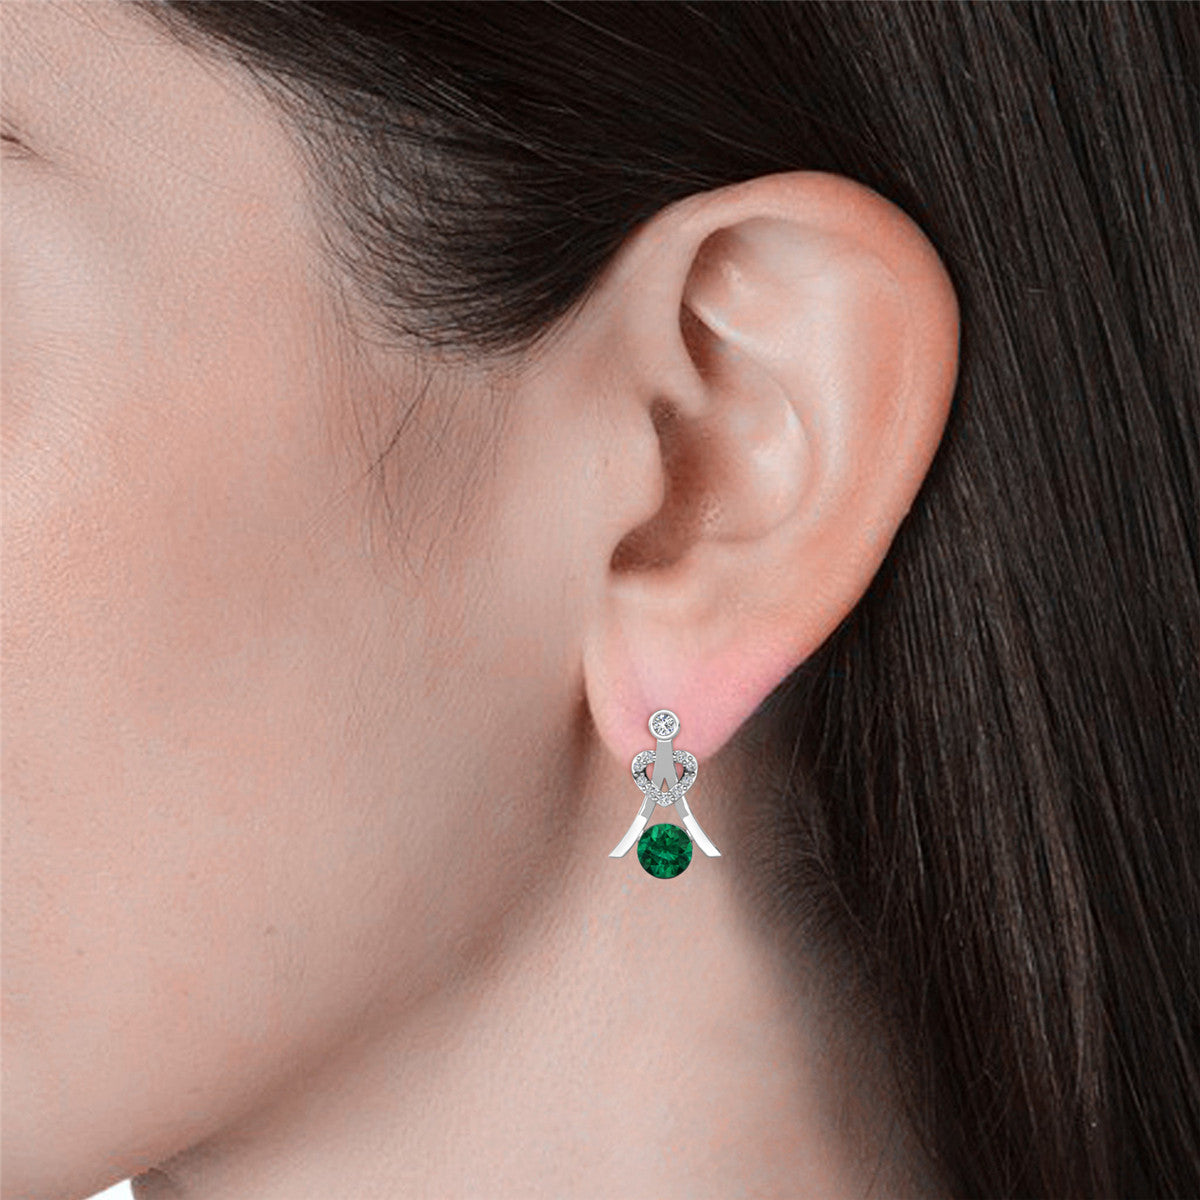 Serenity May Birthstone Emerald Earrings,  18k White Gold Plated Silver Earrings with Round Cut Crystals